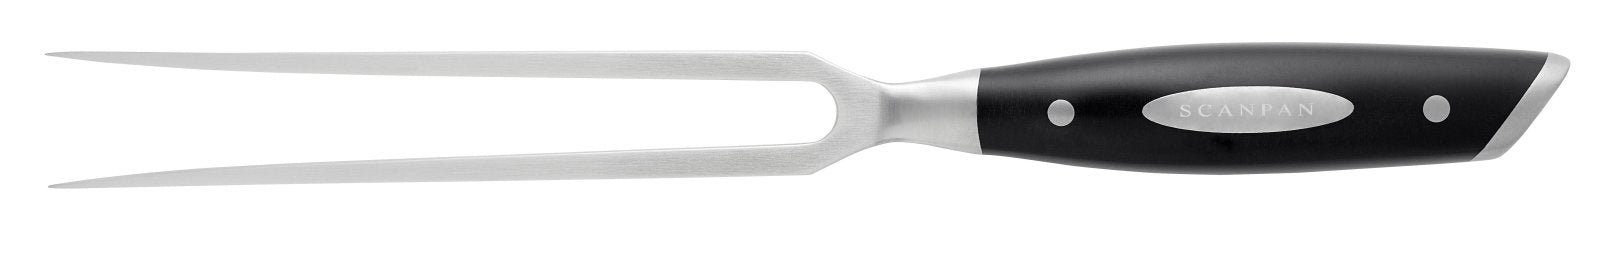 Scanpan Classic 15cm Carving Fork - SP92901000 - The Cotswold Knife Company